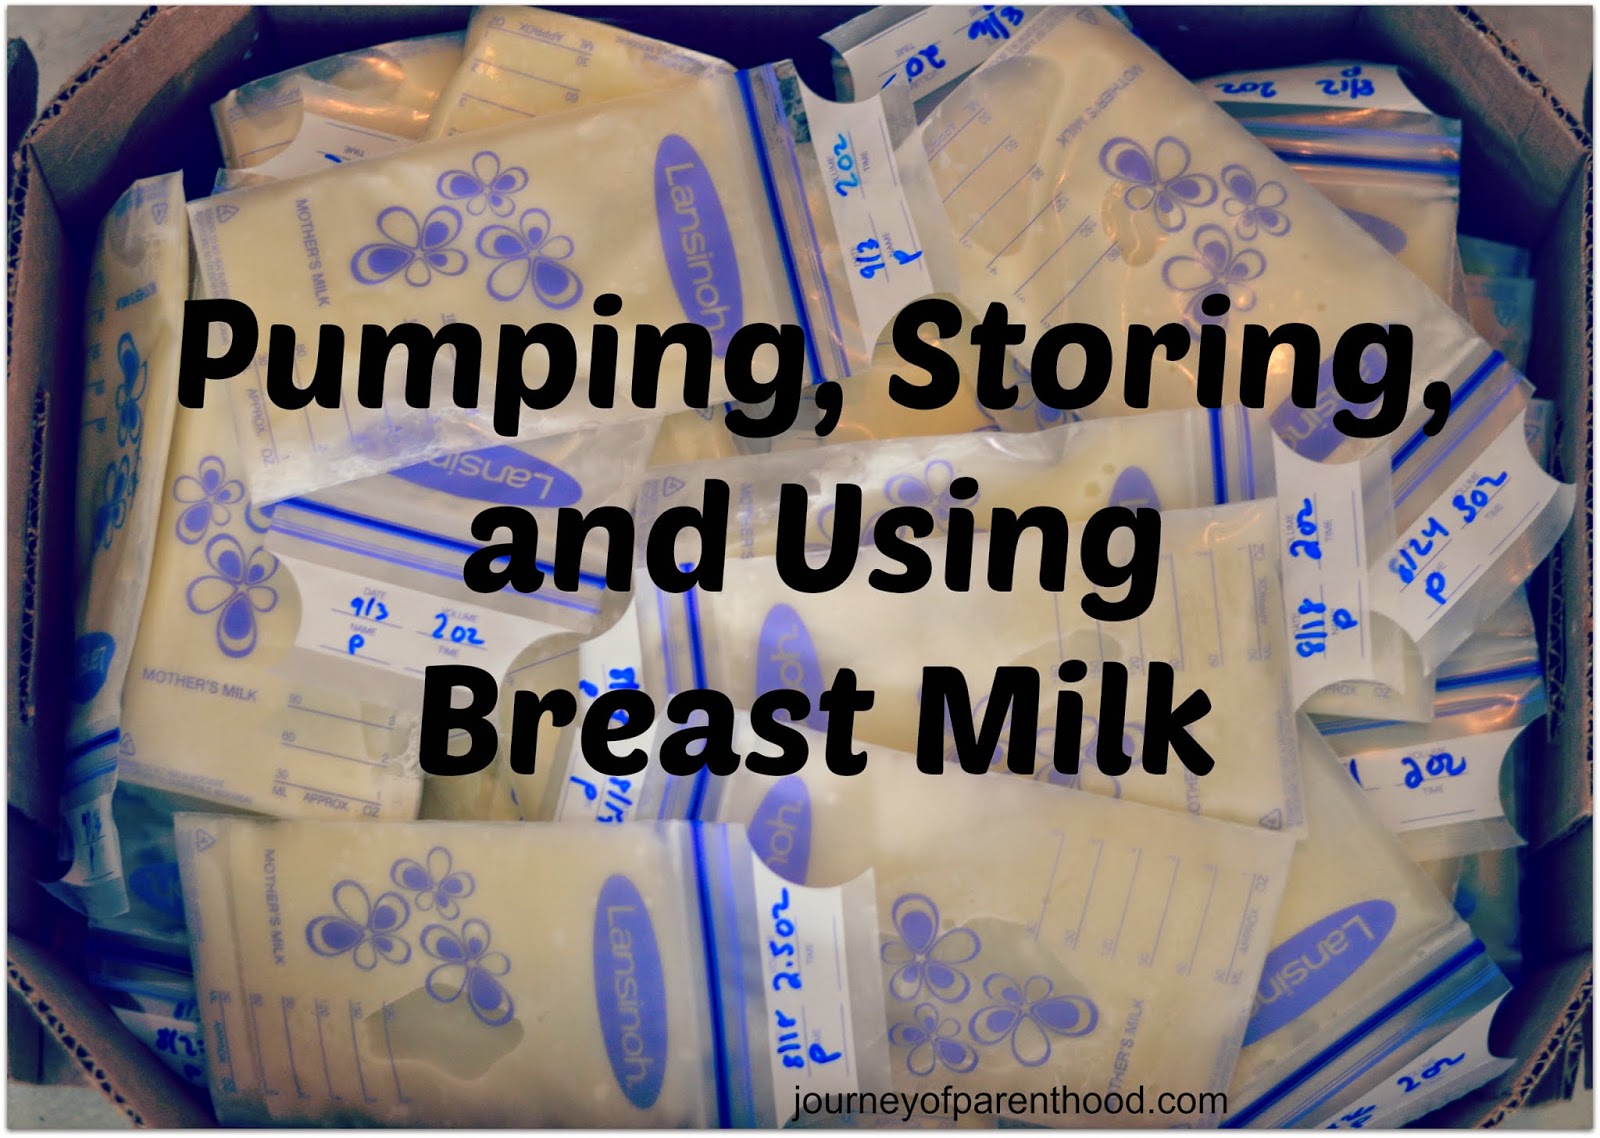 Pumping, Storing and Using Breast Milk